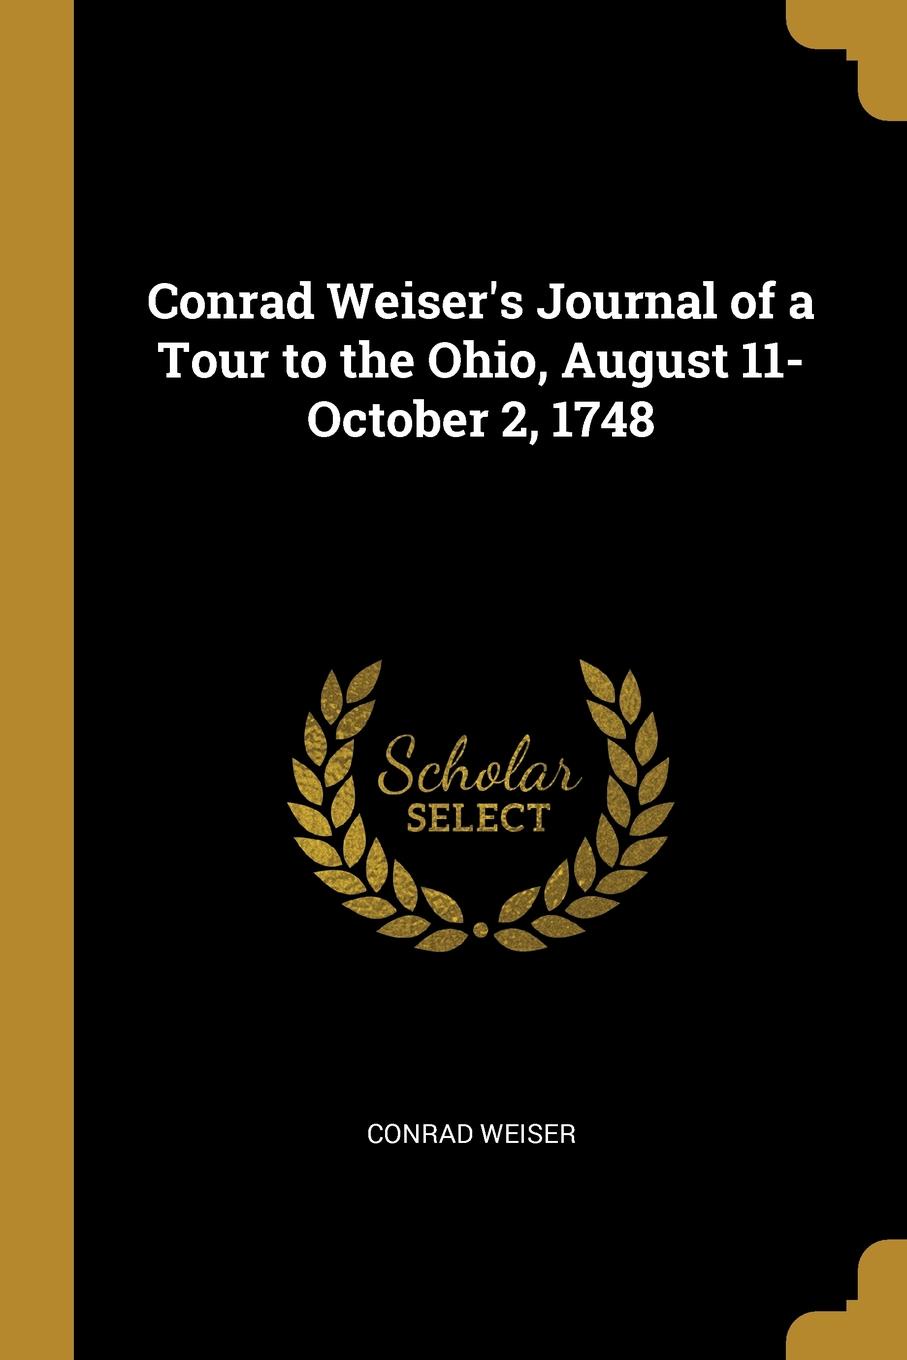 Conrad Weiser.s Journal of a Tour to the Ohio, August 11-October 2, 1748